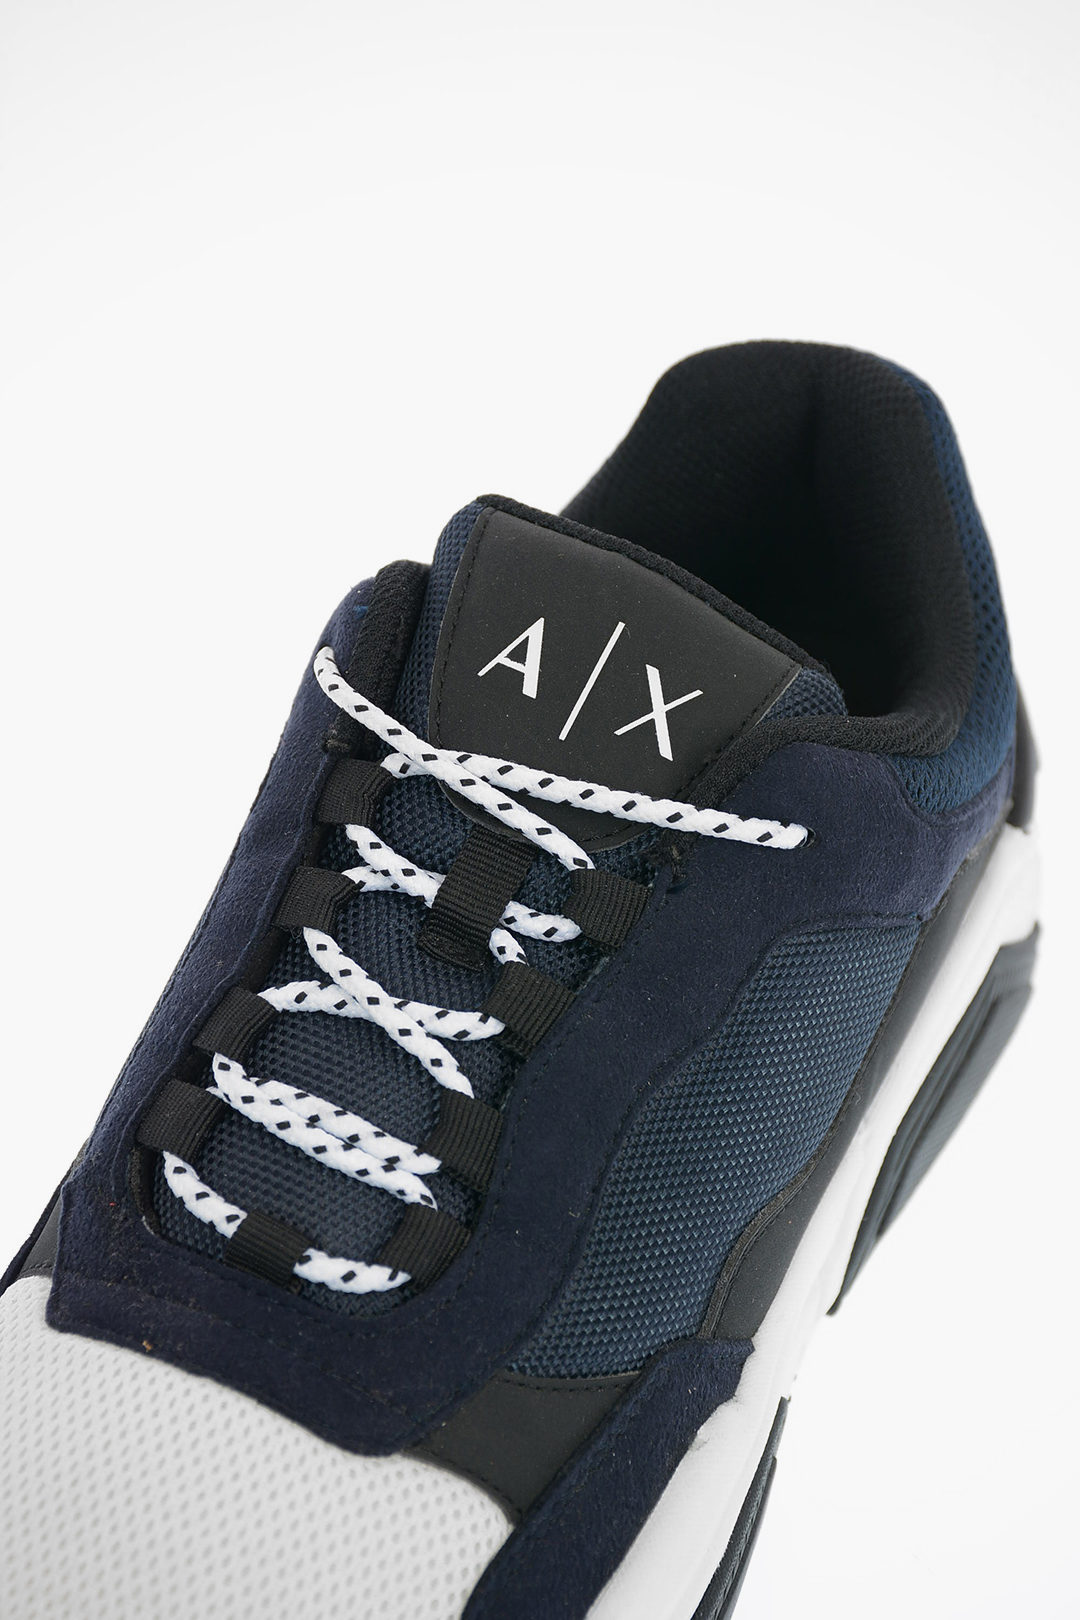 Buy > armani sneakers outlet > in stock